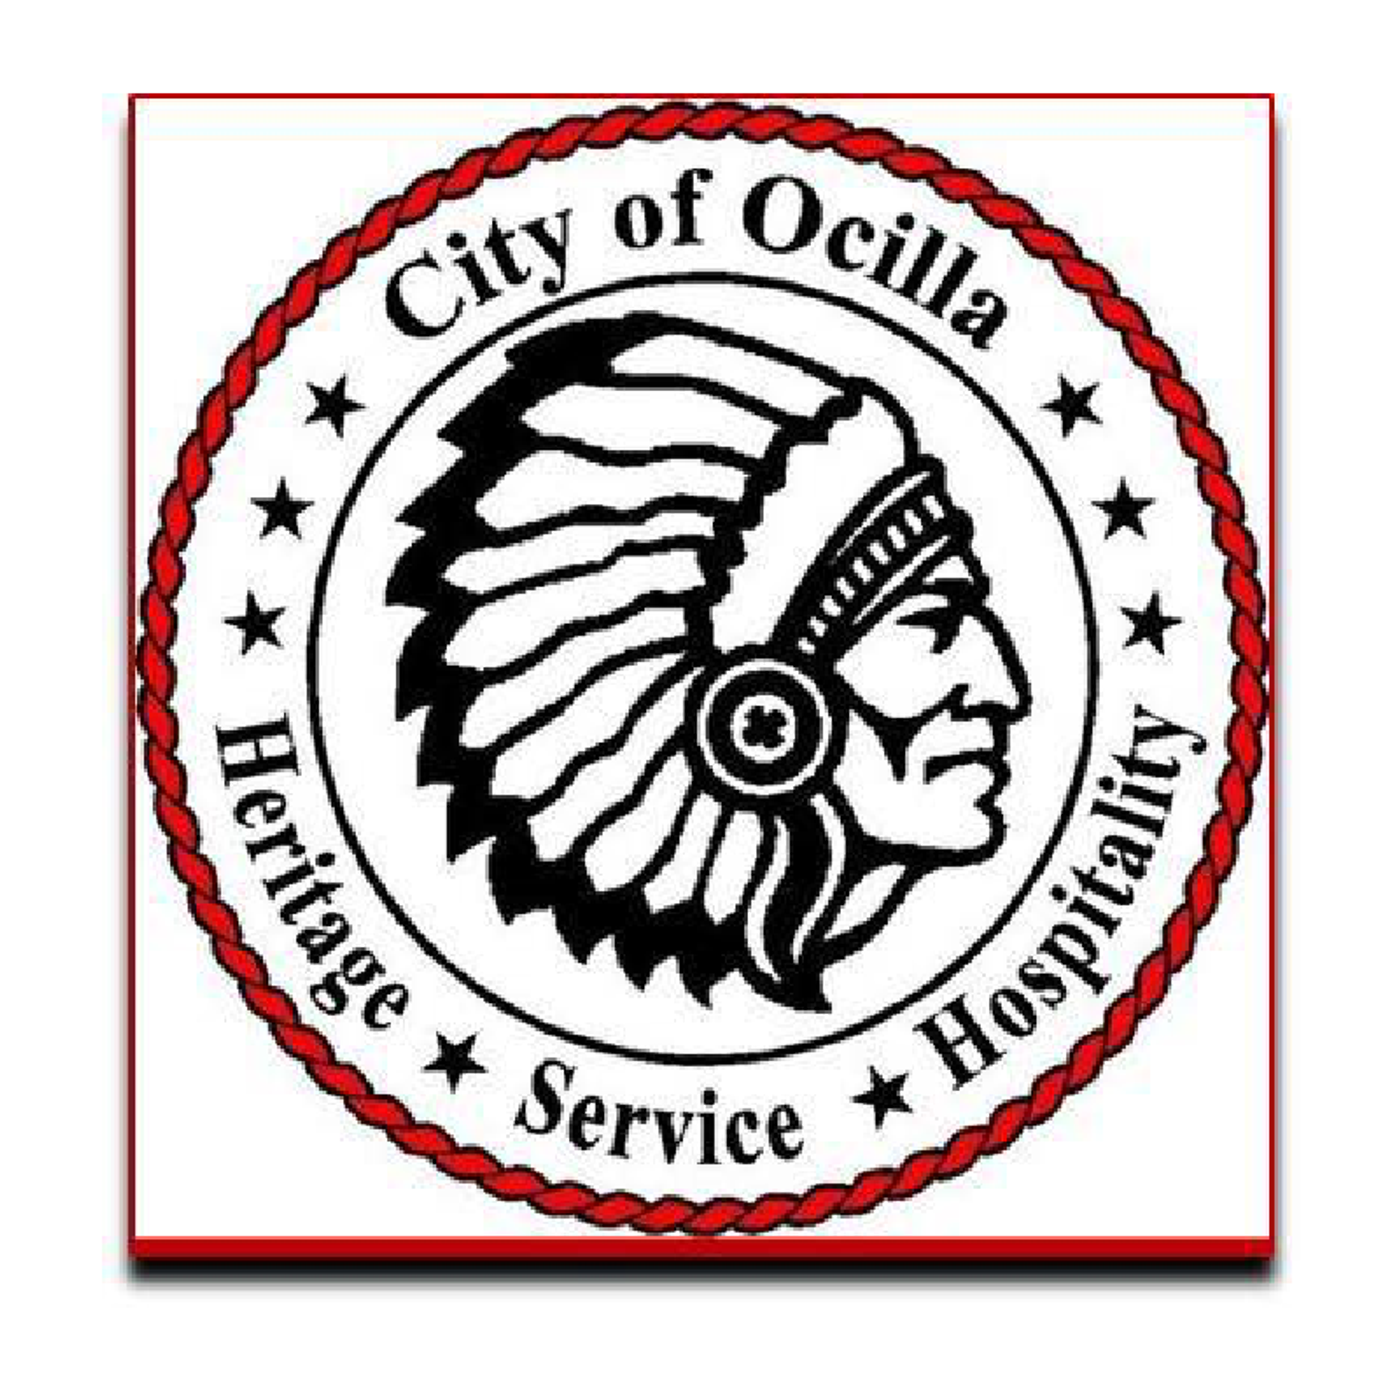 S3 Ep19: The Great City of Ocilla, GA - Part 1